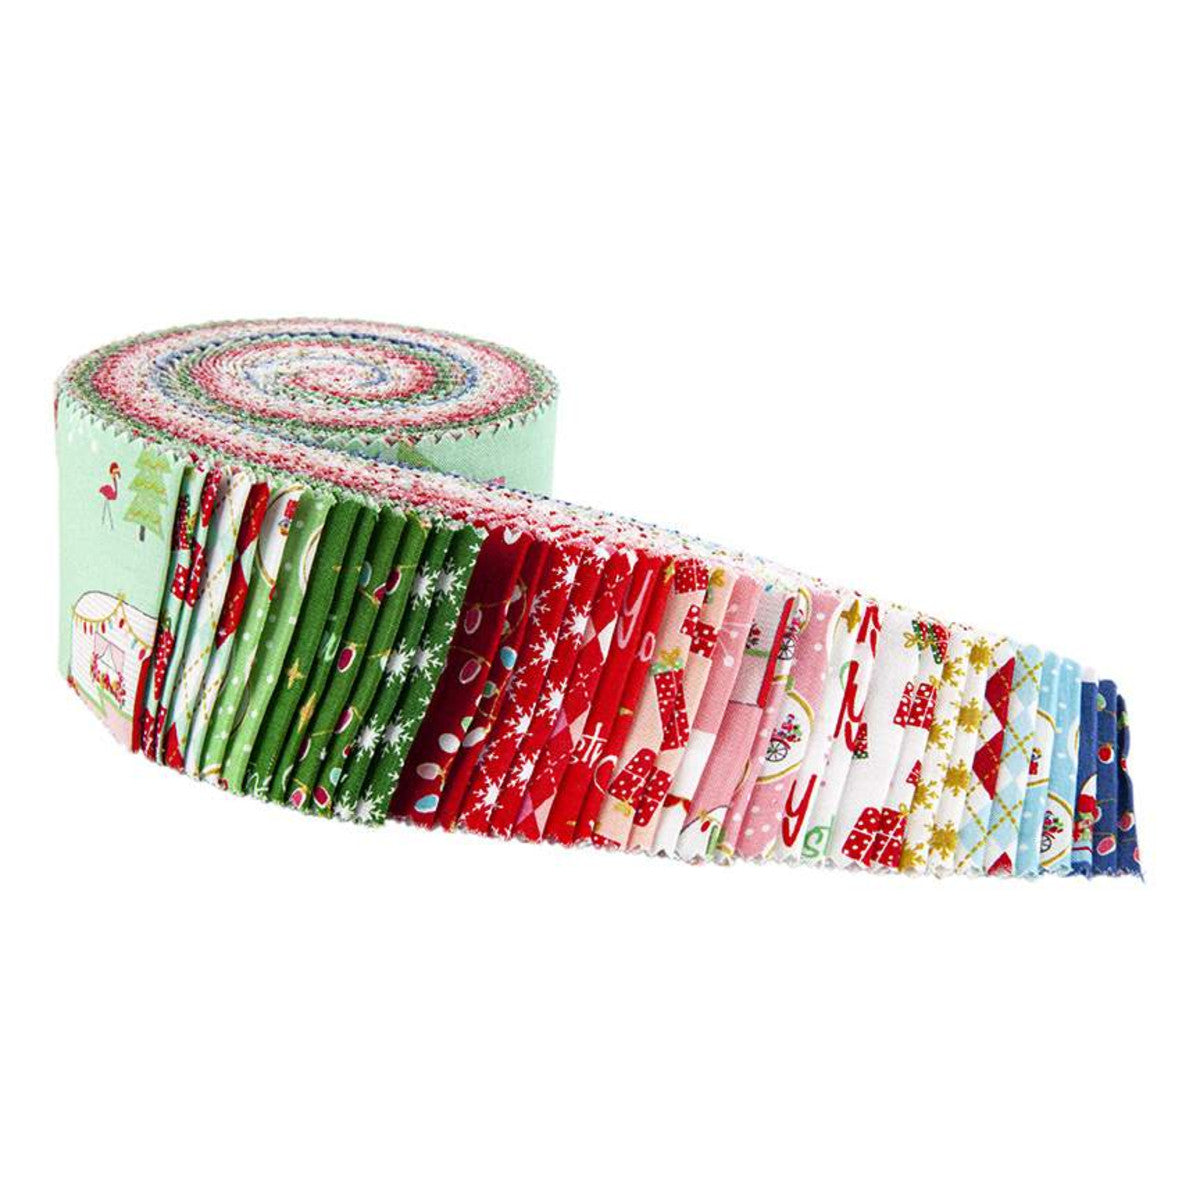 This 2 1/2" Rolie Polie precut bundle includes 40 pieces from the Christmas Adventure collection by Beverly McCullough of Flamingo Toes for Riley Blake Designs. Each print will be included 1-2 times in the bundle.  100% cotton  Width: 2 1/2" Strips